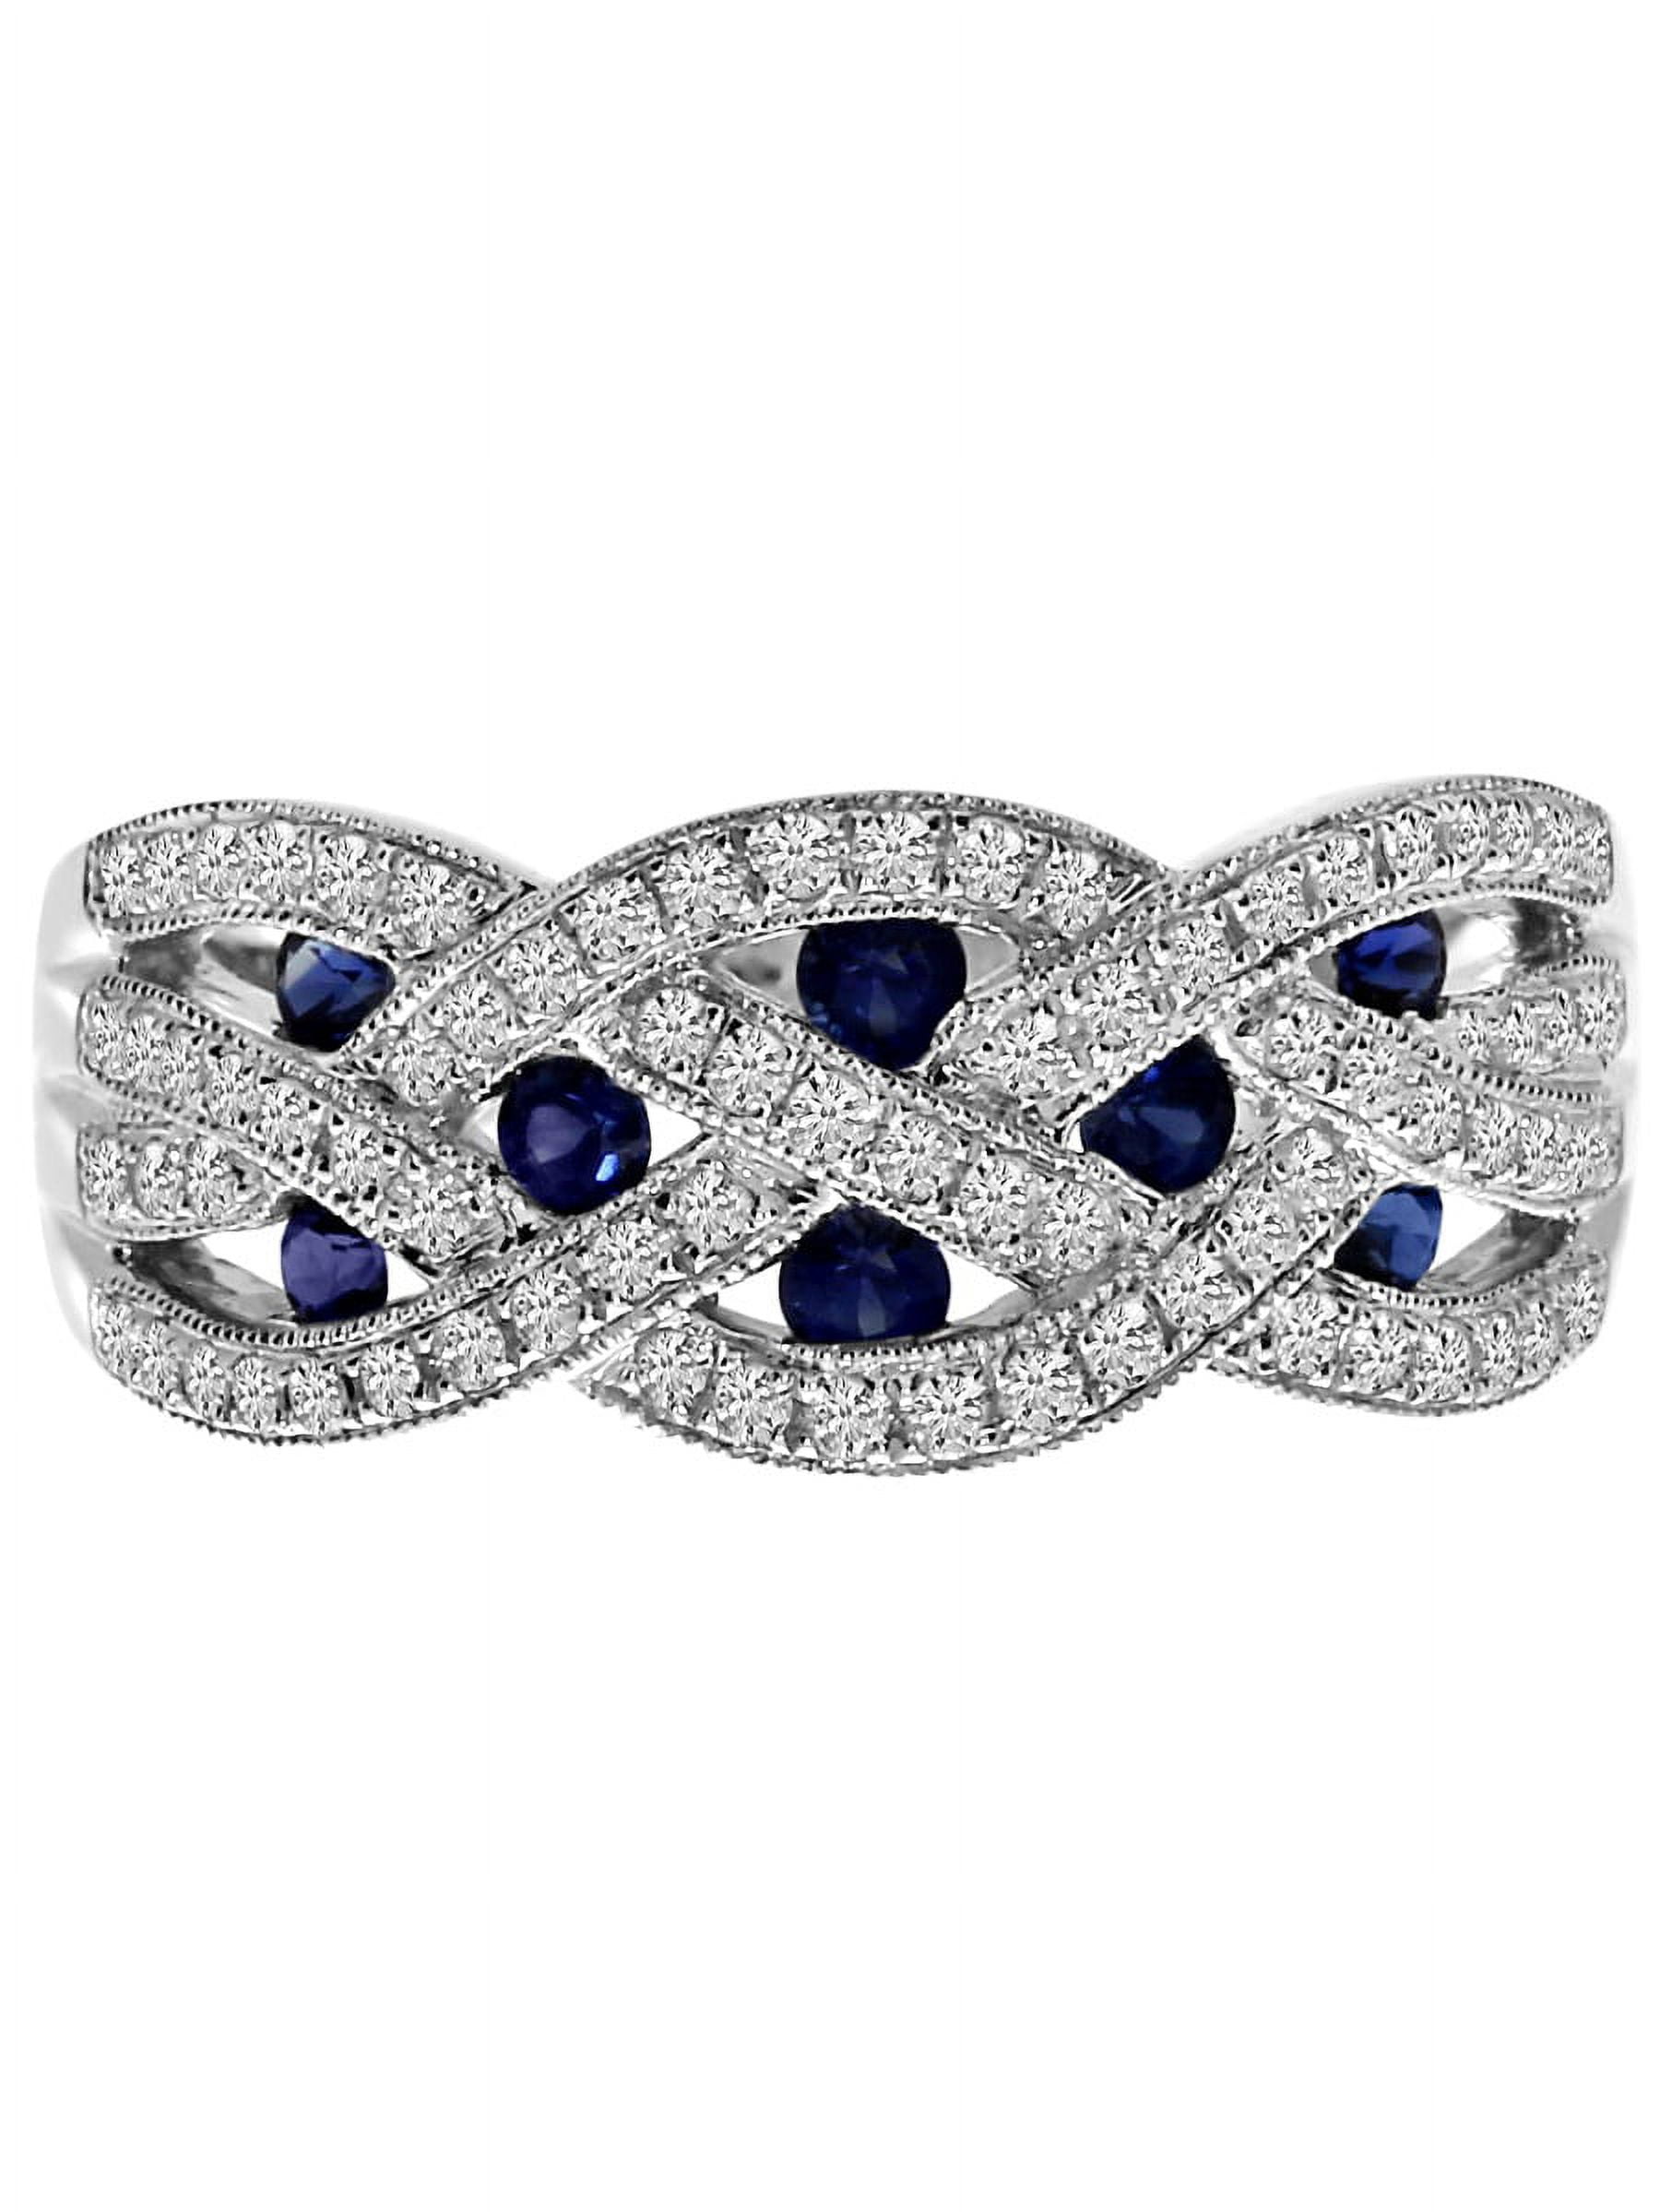 14k White Gold Sapphire and Diamond Braided Wide Band 